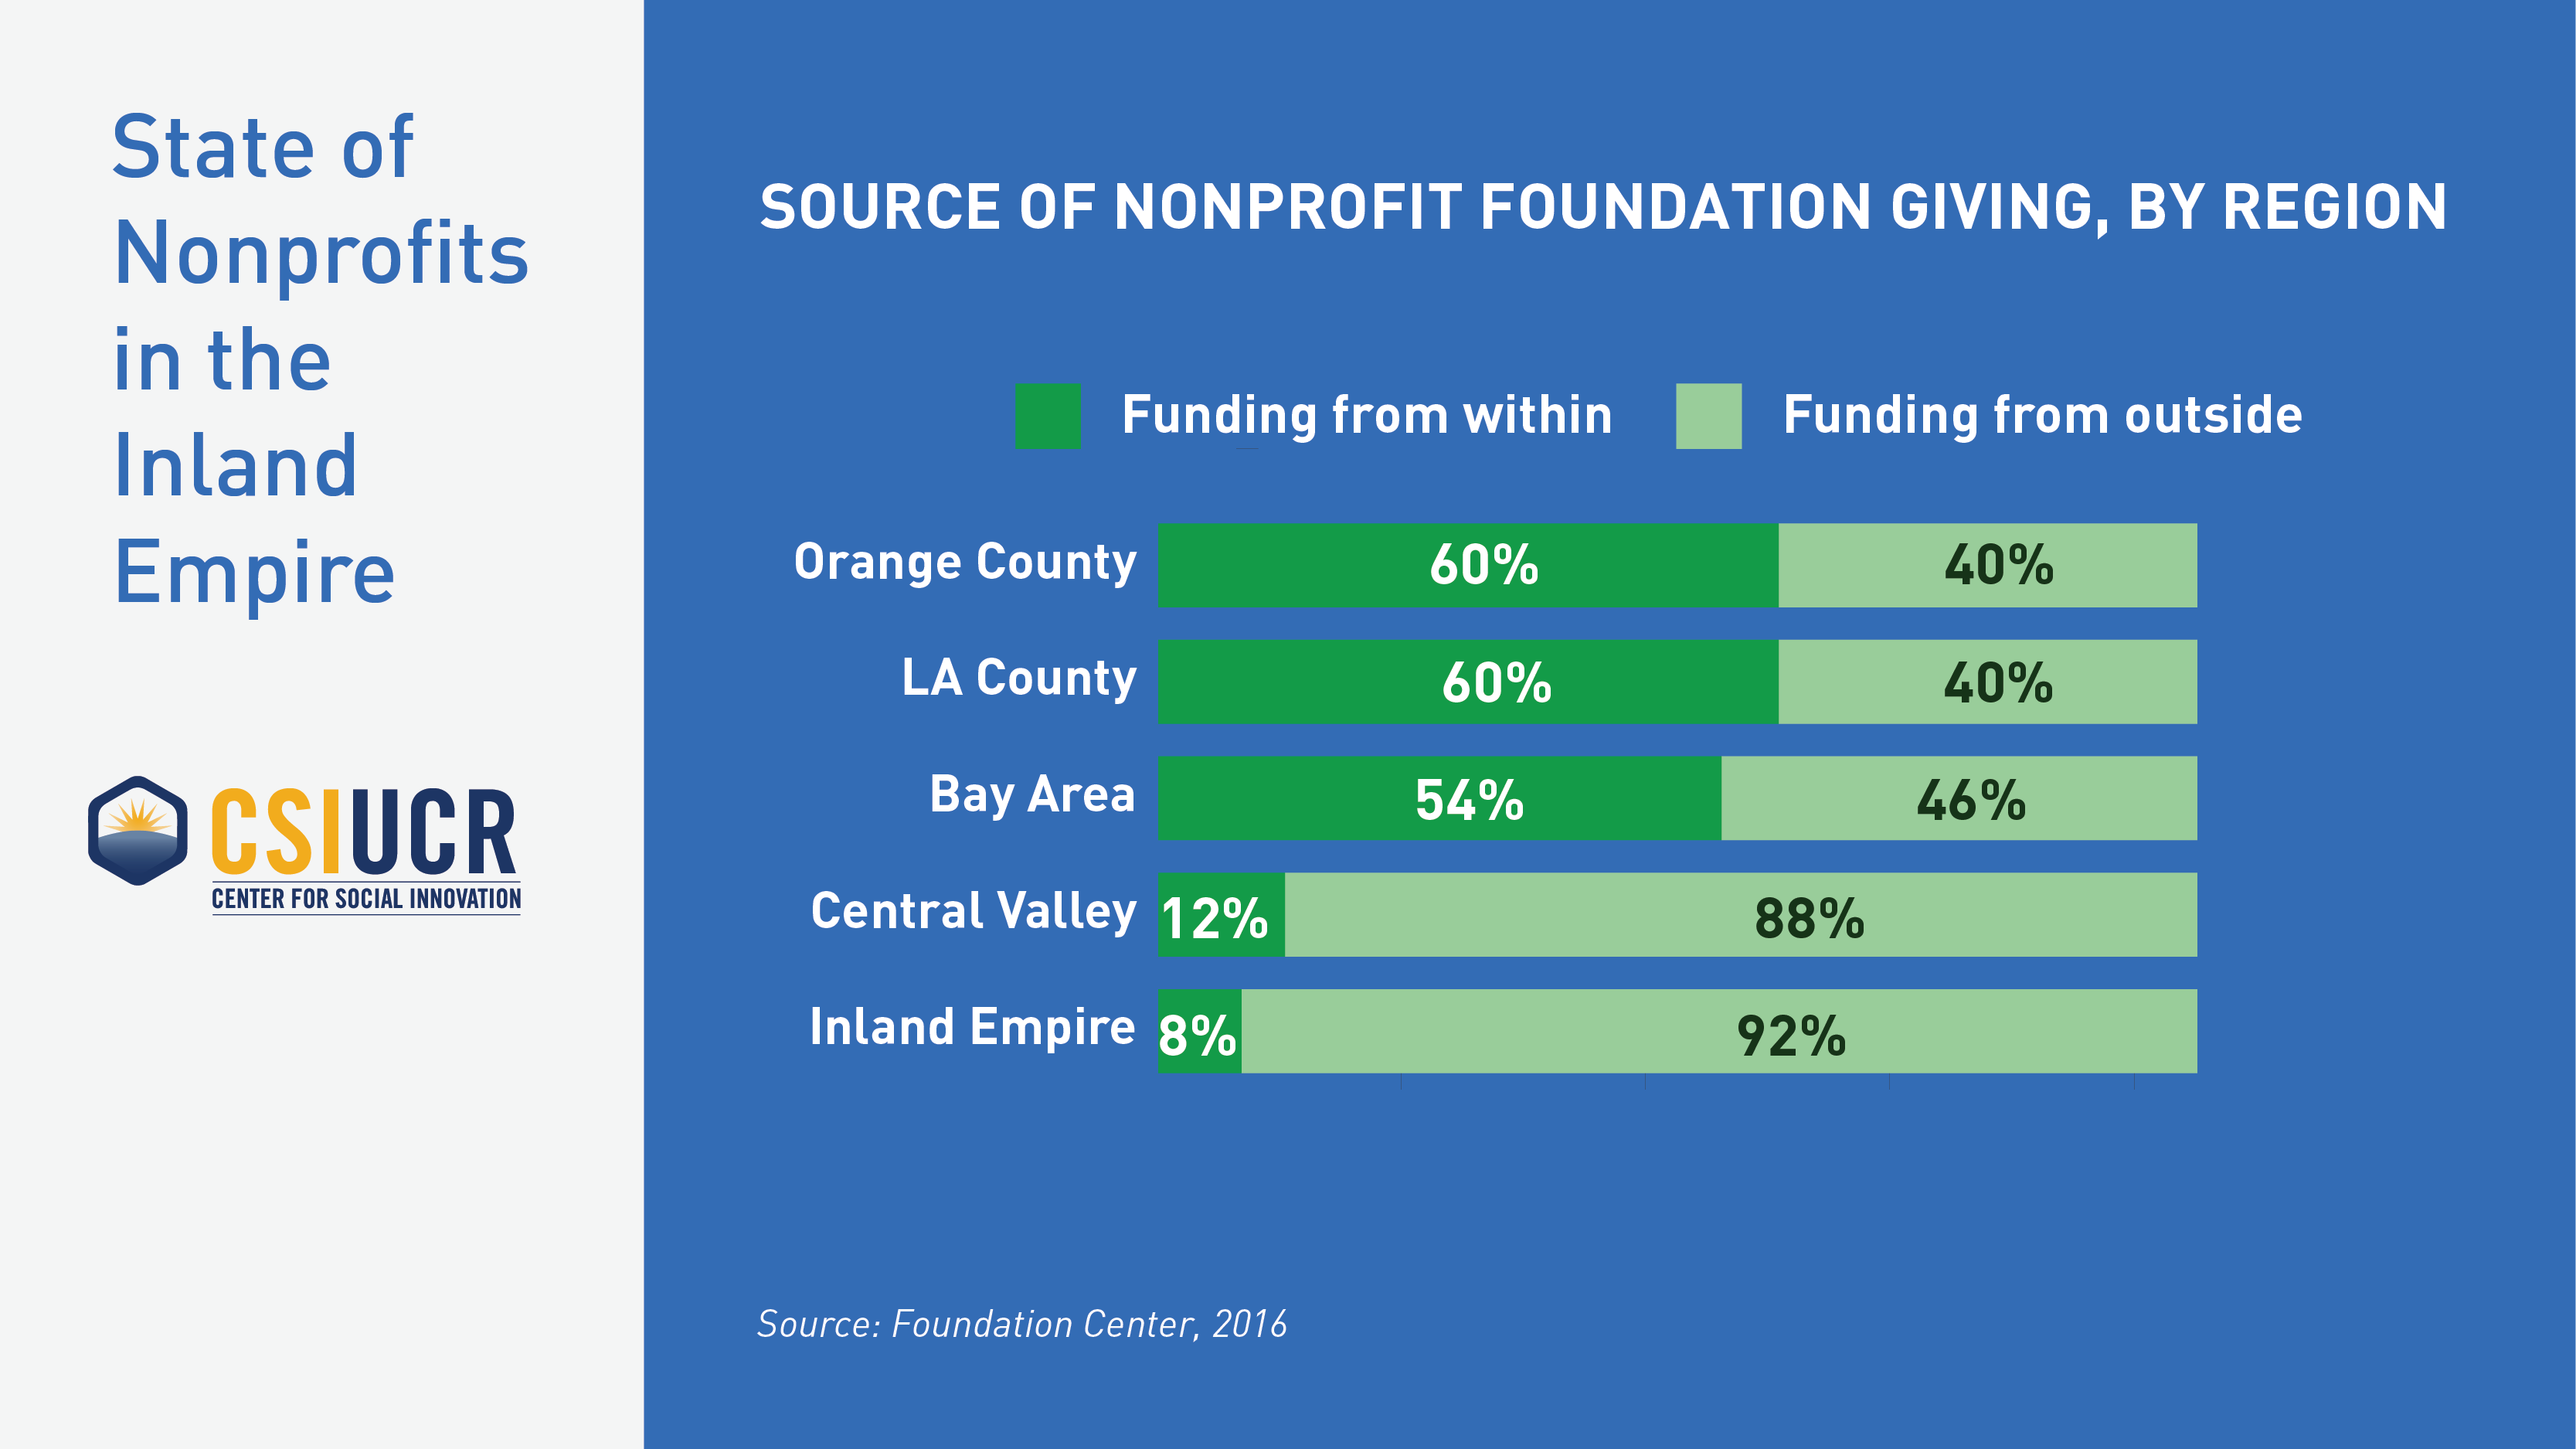 Source of Nonprofit Foundation Giving, By Region